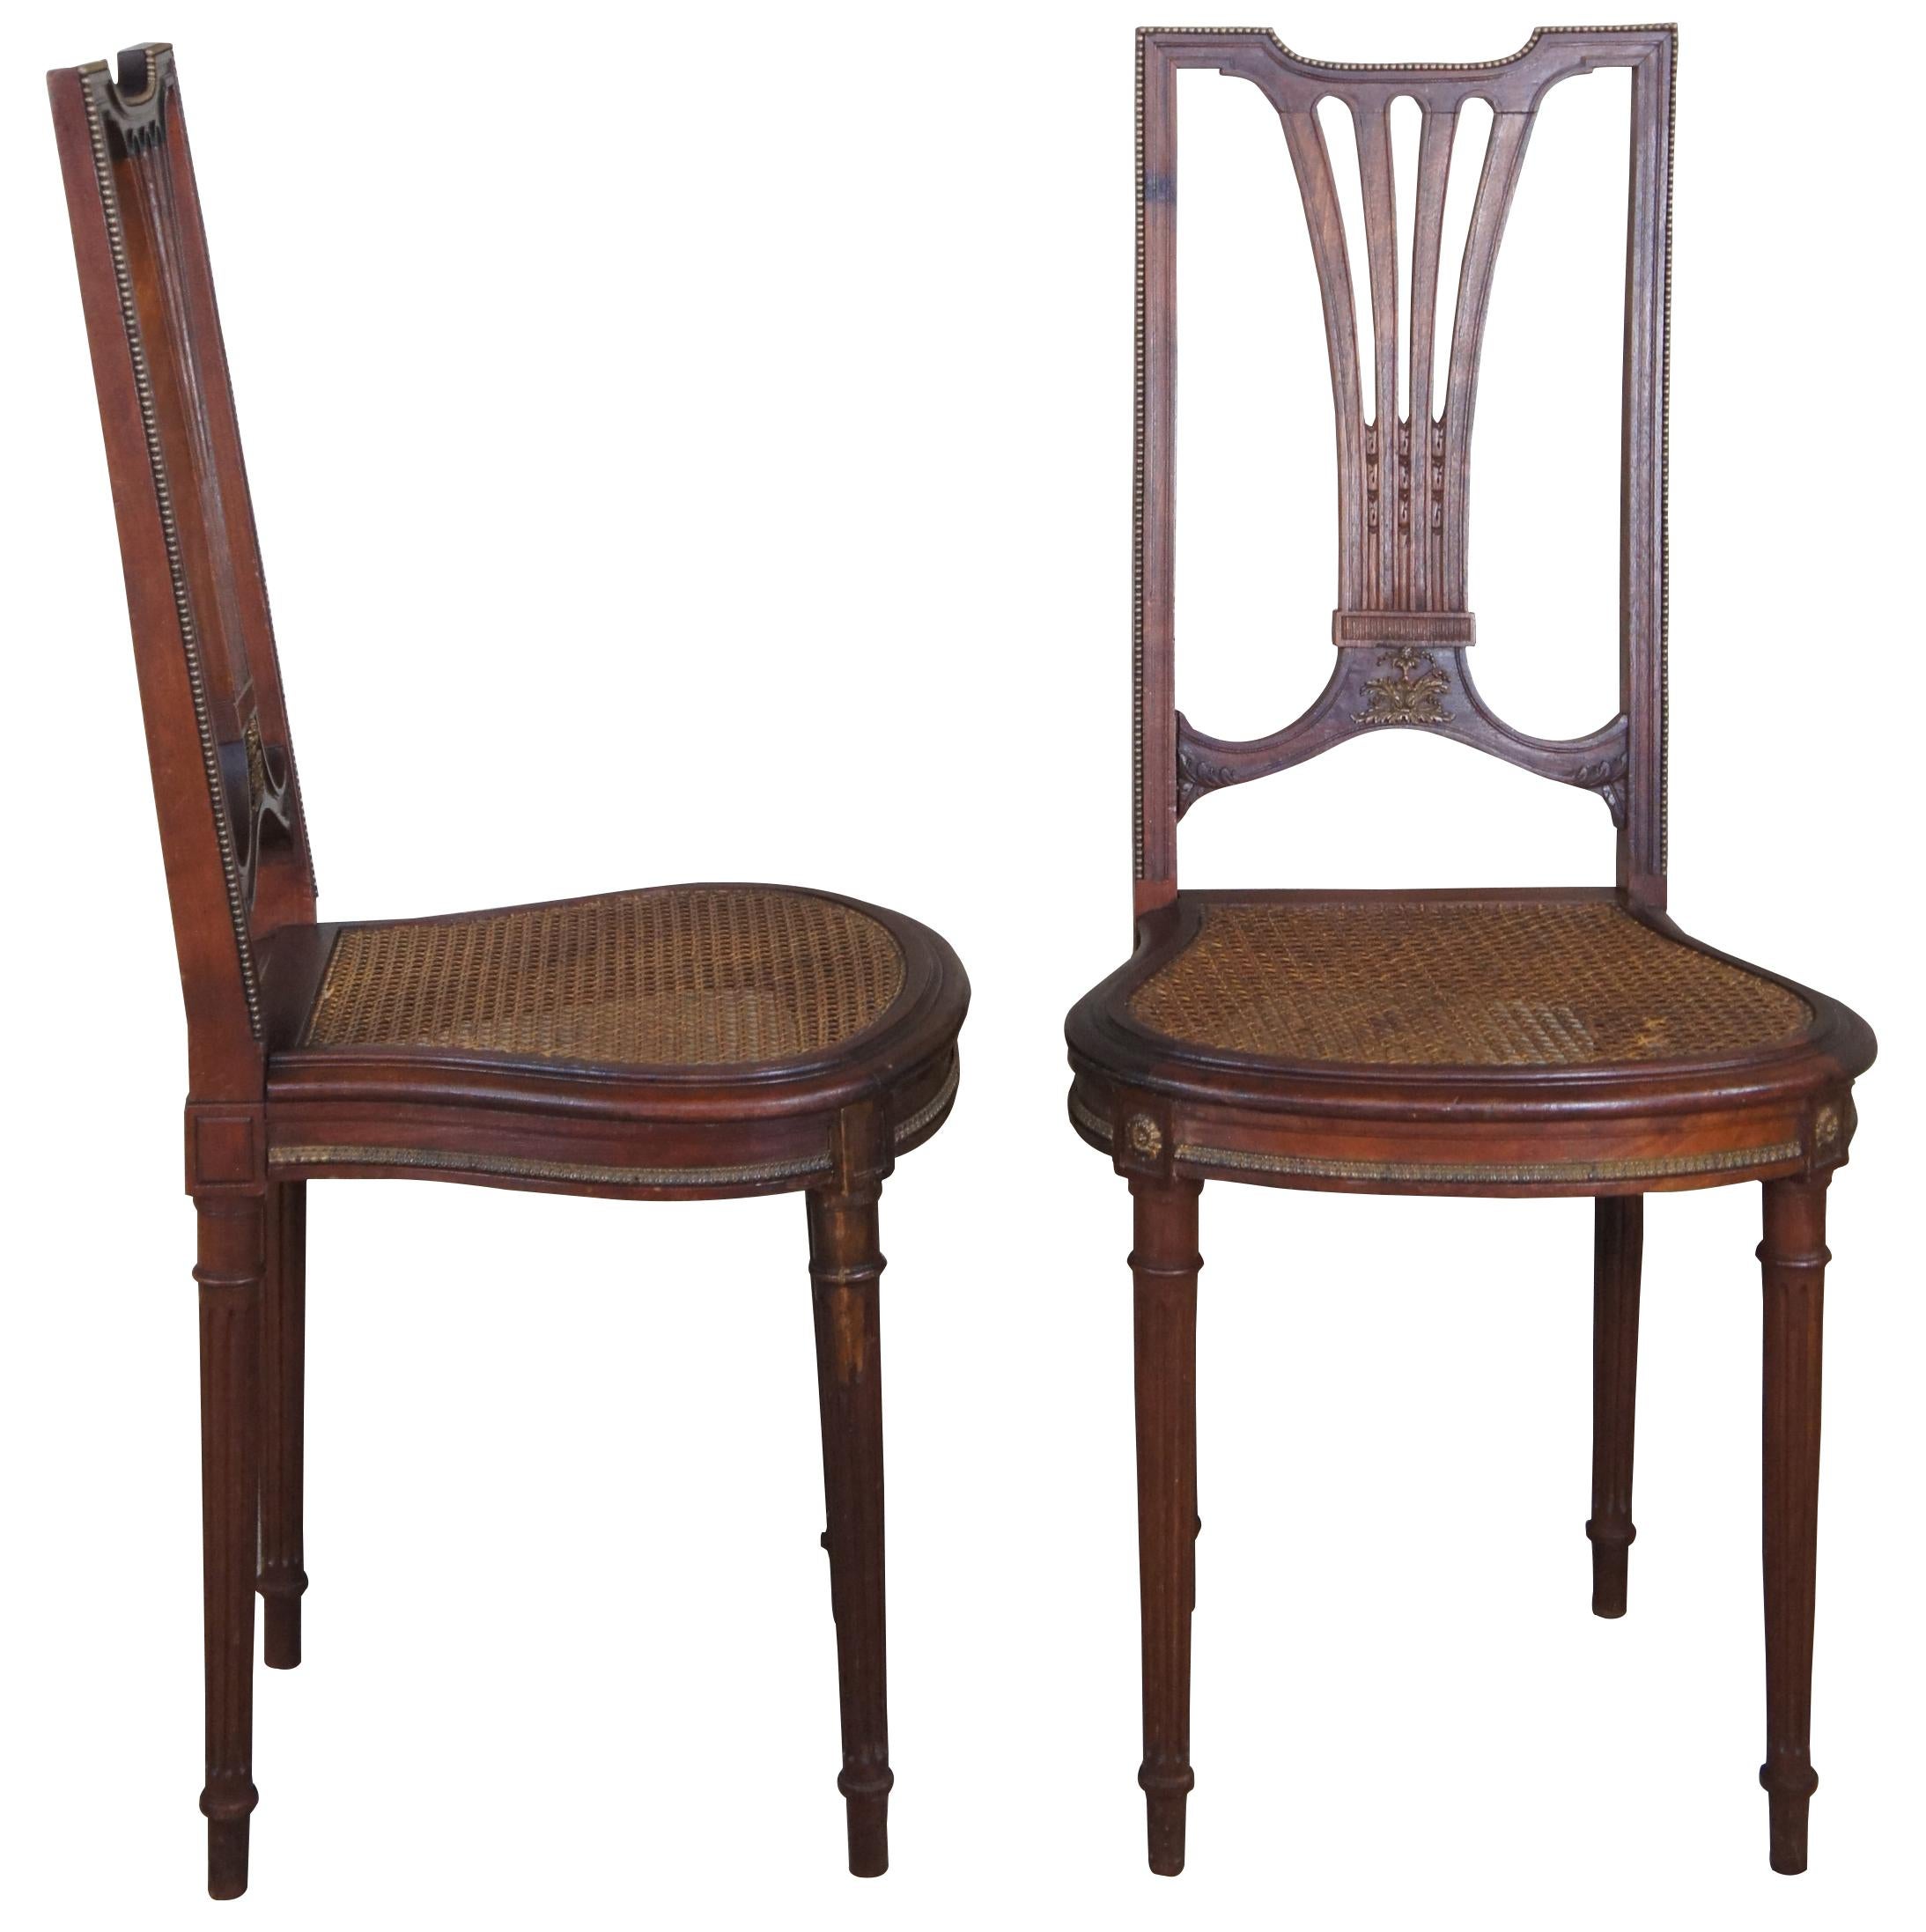 An elegant pair of Louis XVI petite side chairs, circa 1870s. Made from solid walnut with a high back featuring pierced splat and caned seat. The chair includes a beaded bronze framework that follows the contour of the seat back. Complimented by